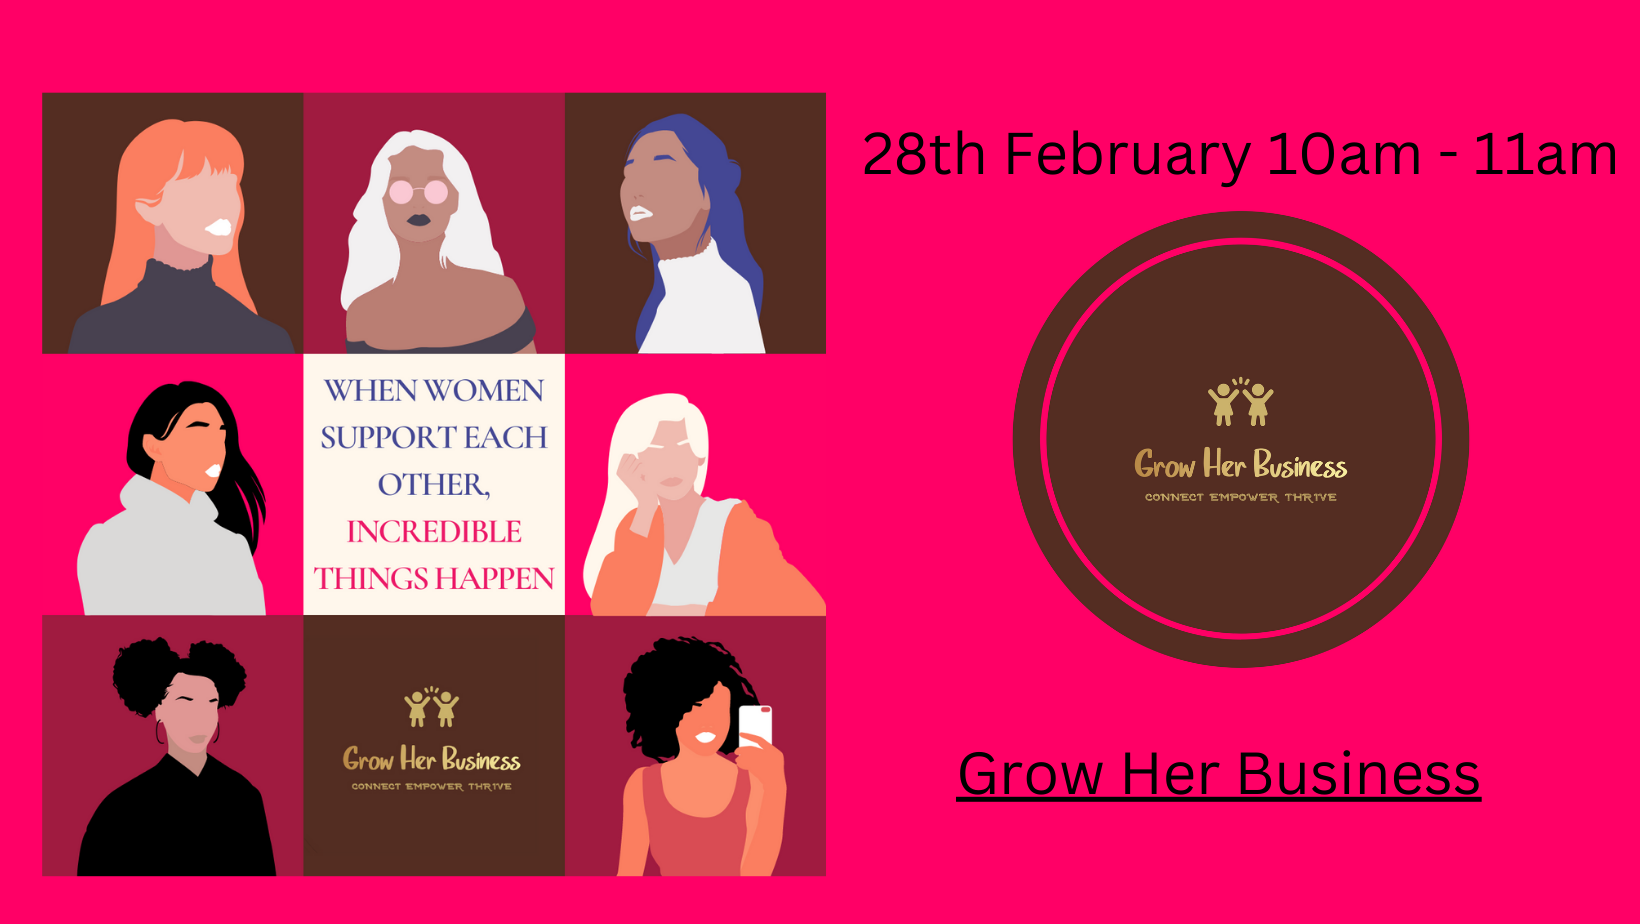 Grow Her Business Open Networking for Women